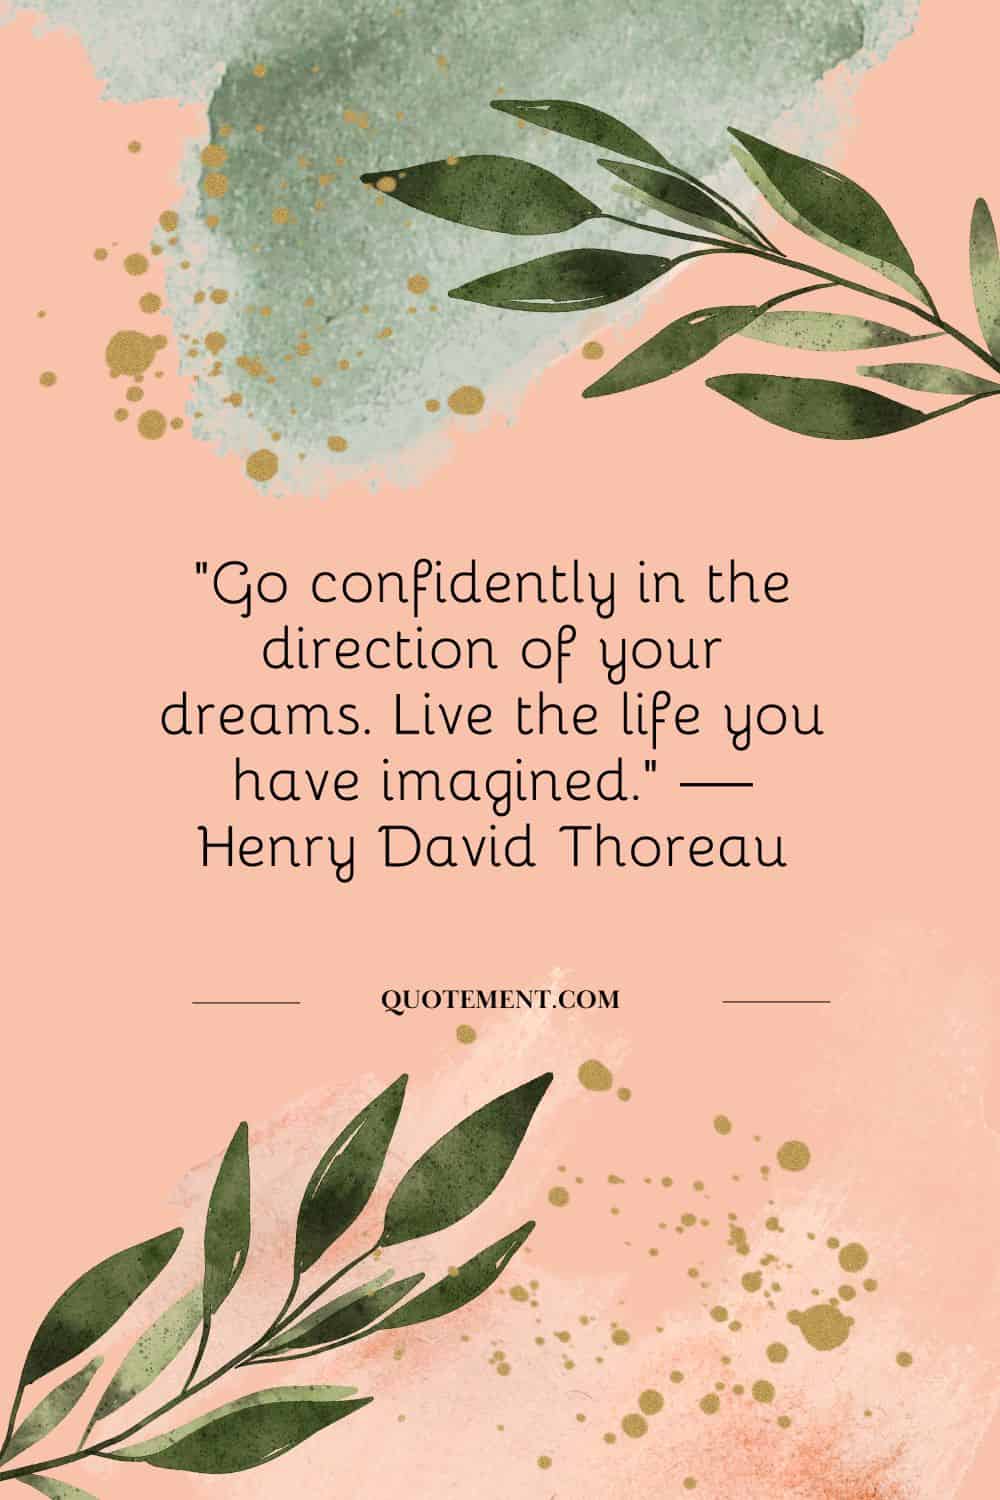 “Go confidently in the direction of your dreams. Live the life you have imagined.” — Henry David Thoreau